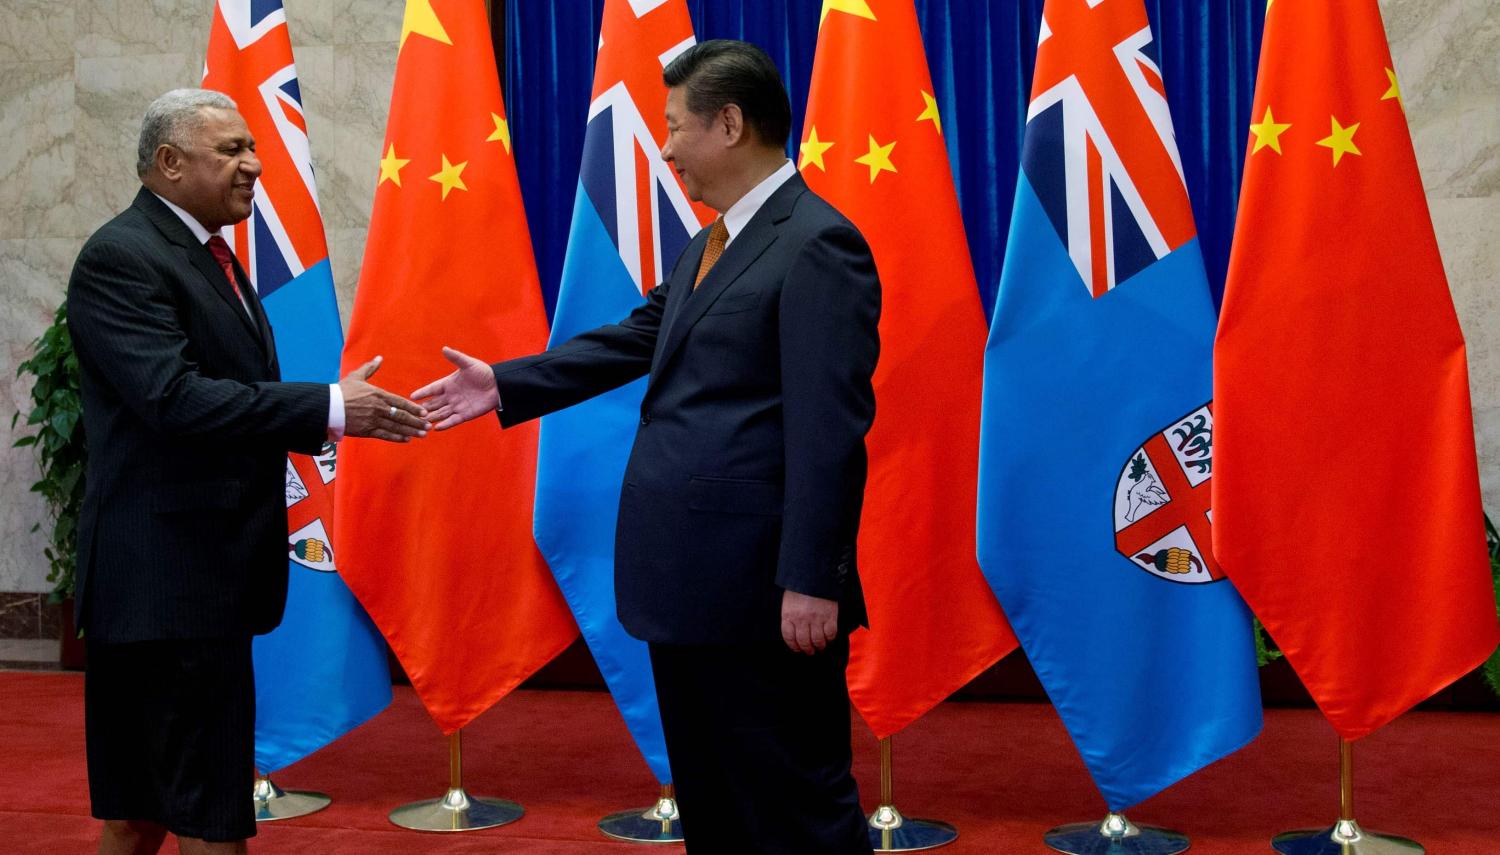 Fijian Prime Minister Frank Bainimarama and Chinese President Xi Jinping, July 2015 (Photo: Andy Wong/Getty Images)